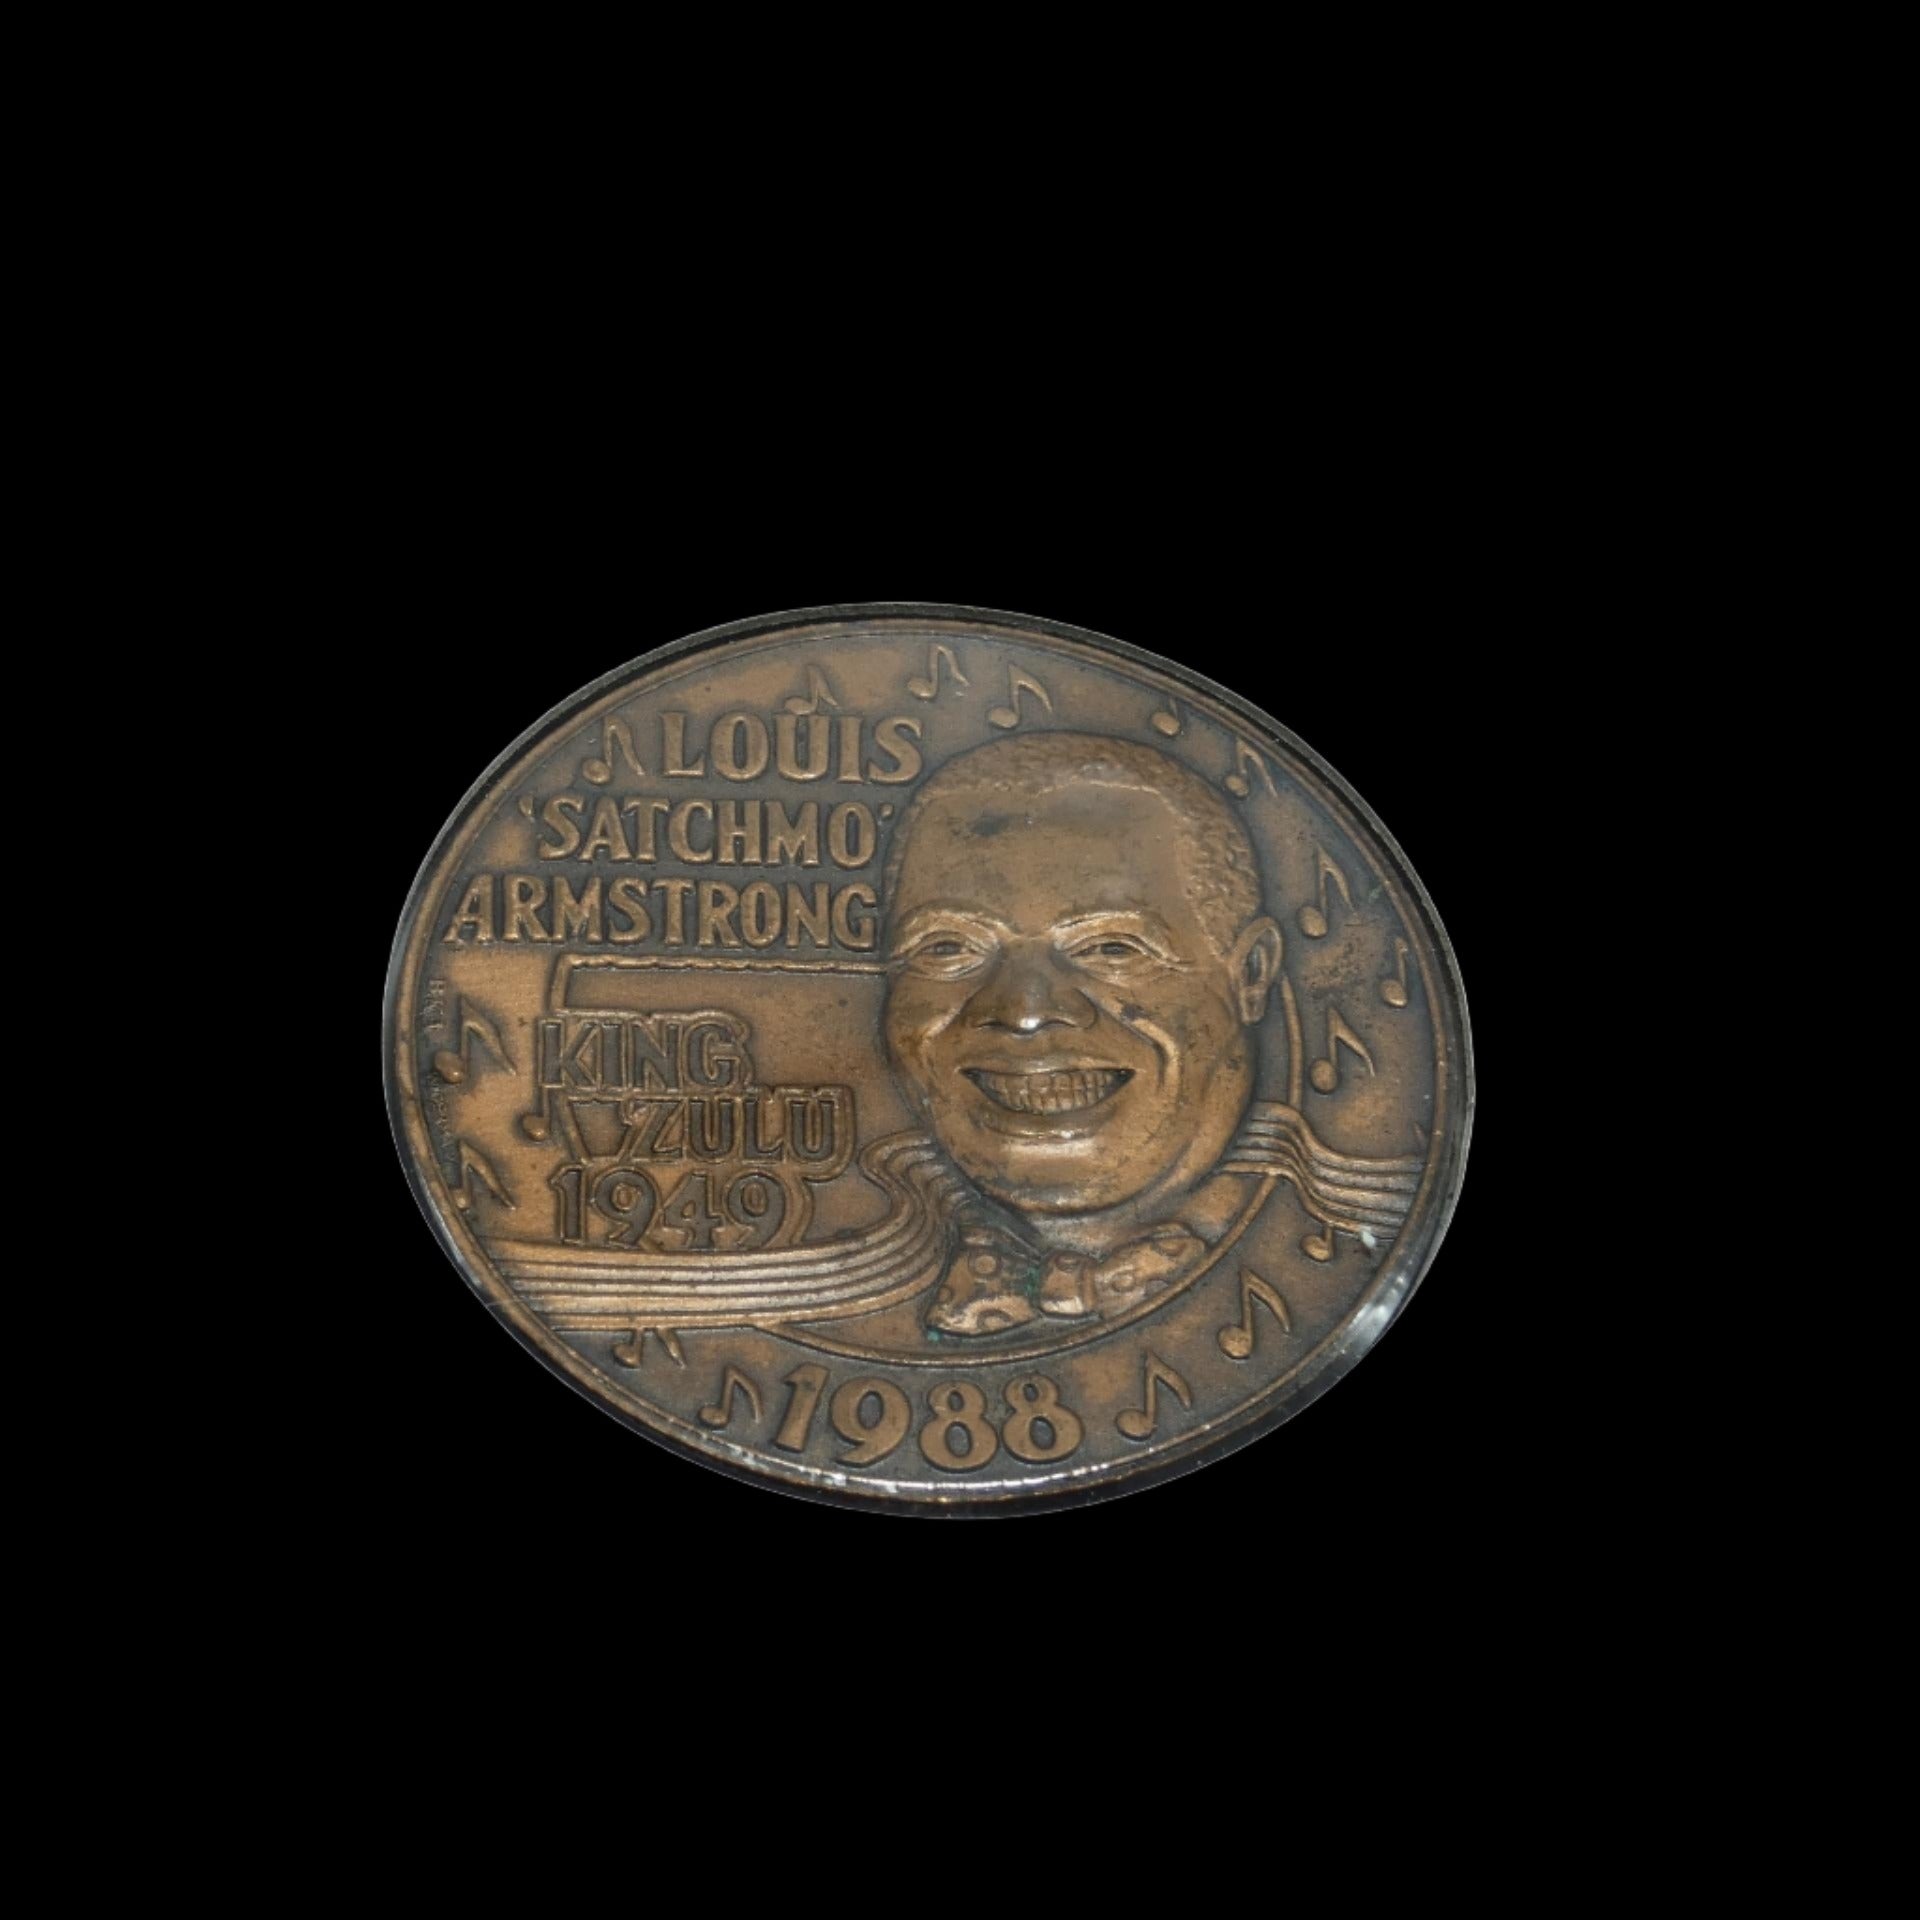 Commemorative Coin - Louis Armstrong 1988 obv